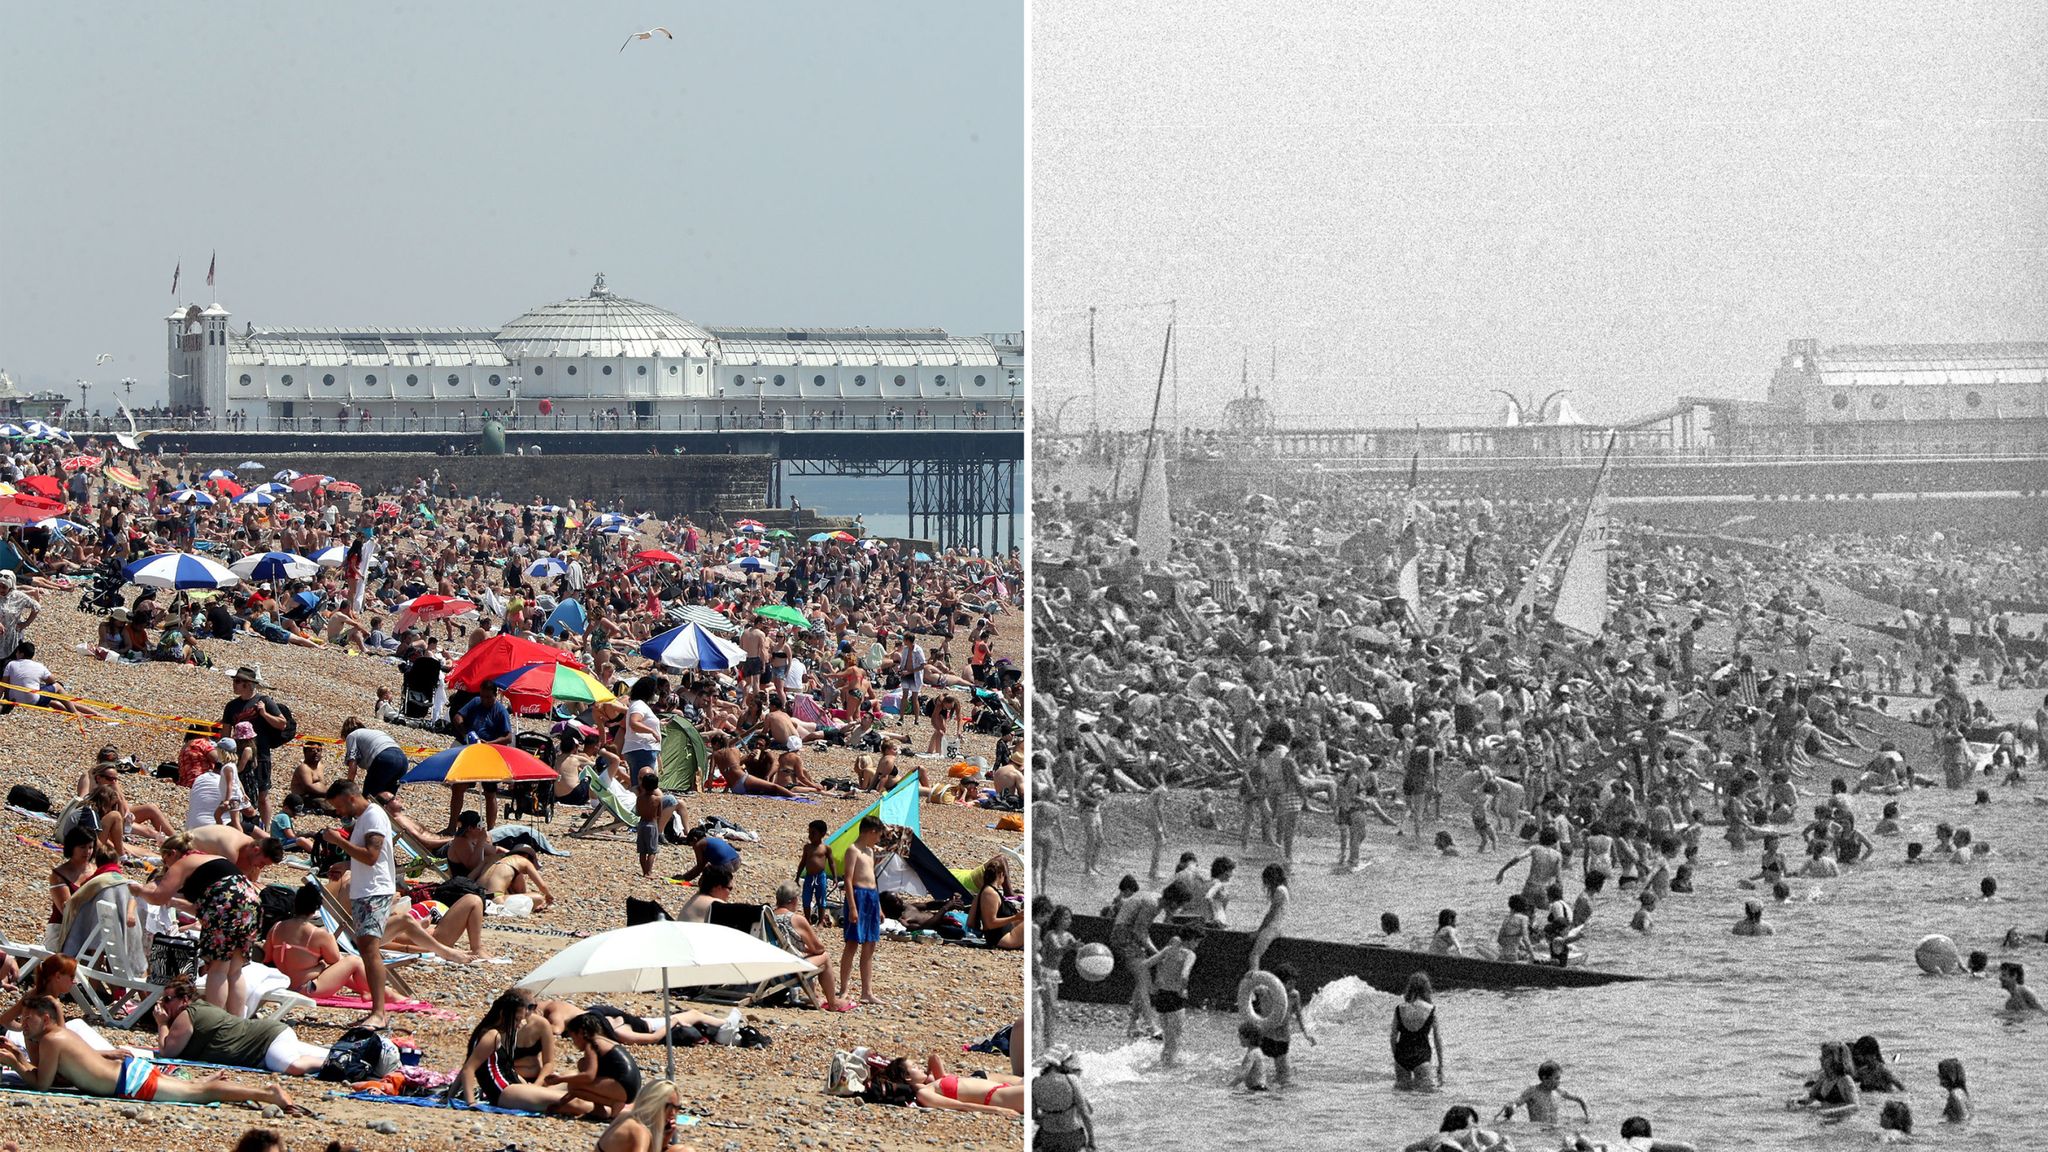 Uk Heatwave How Does 2018 Compare With The Record Breaking Summer Of 1976 Uk News Sky News 3956